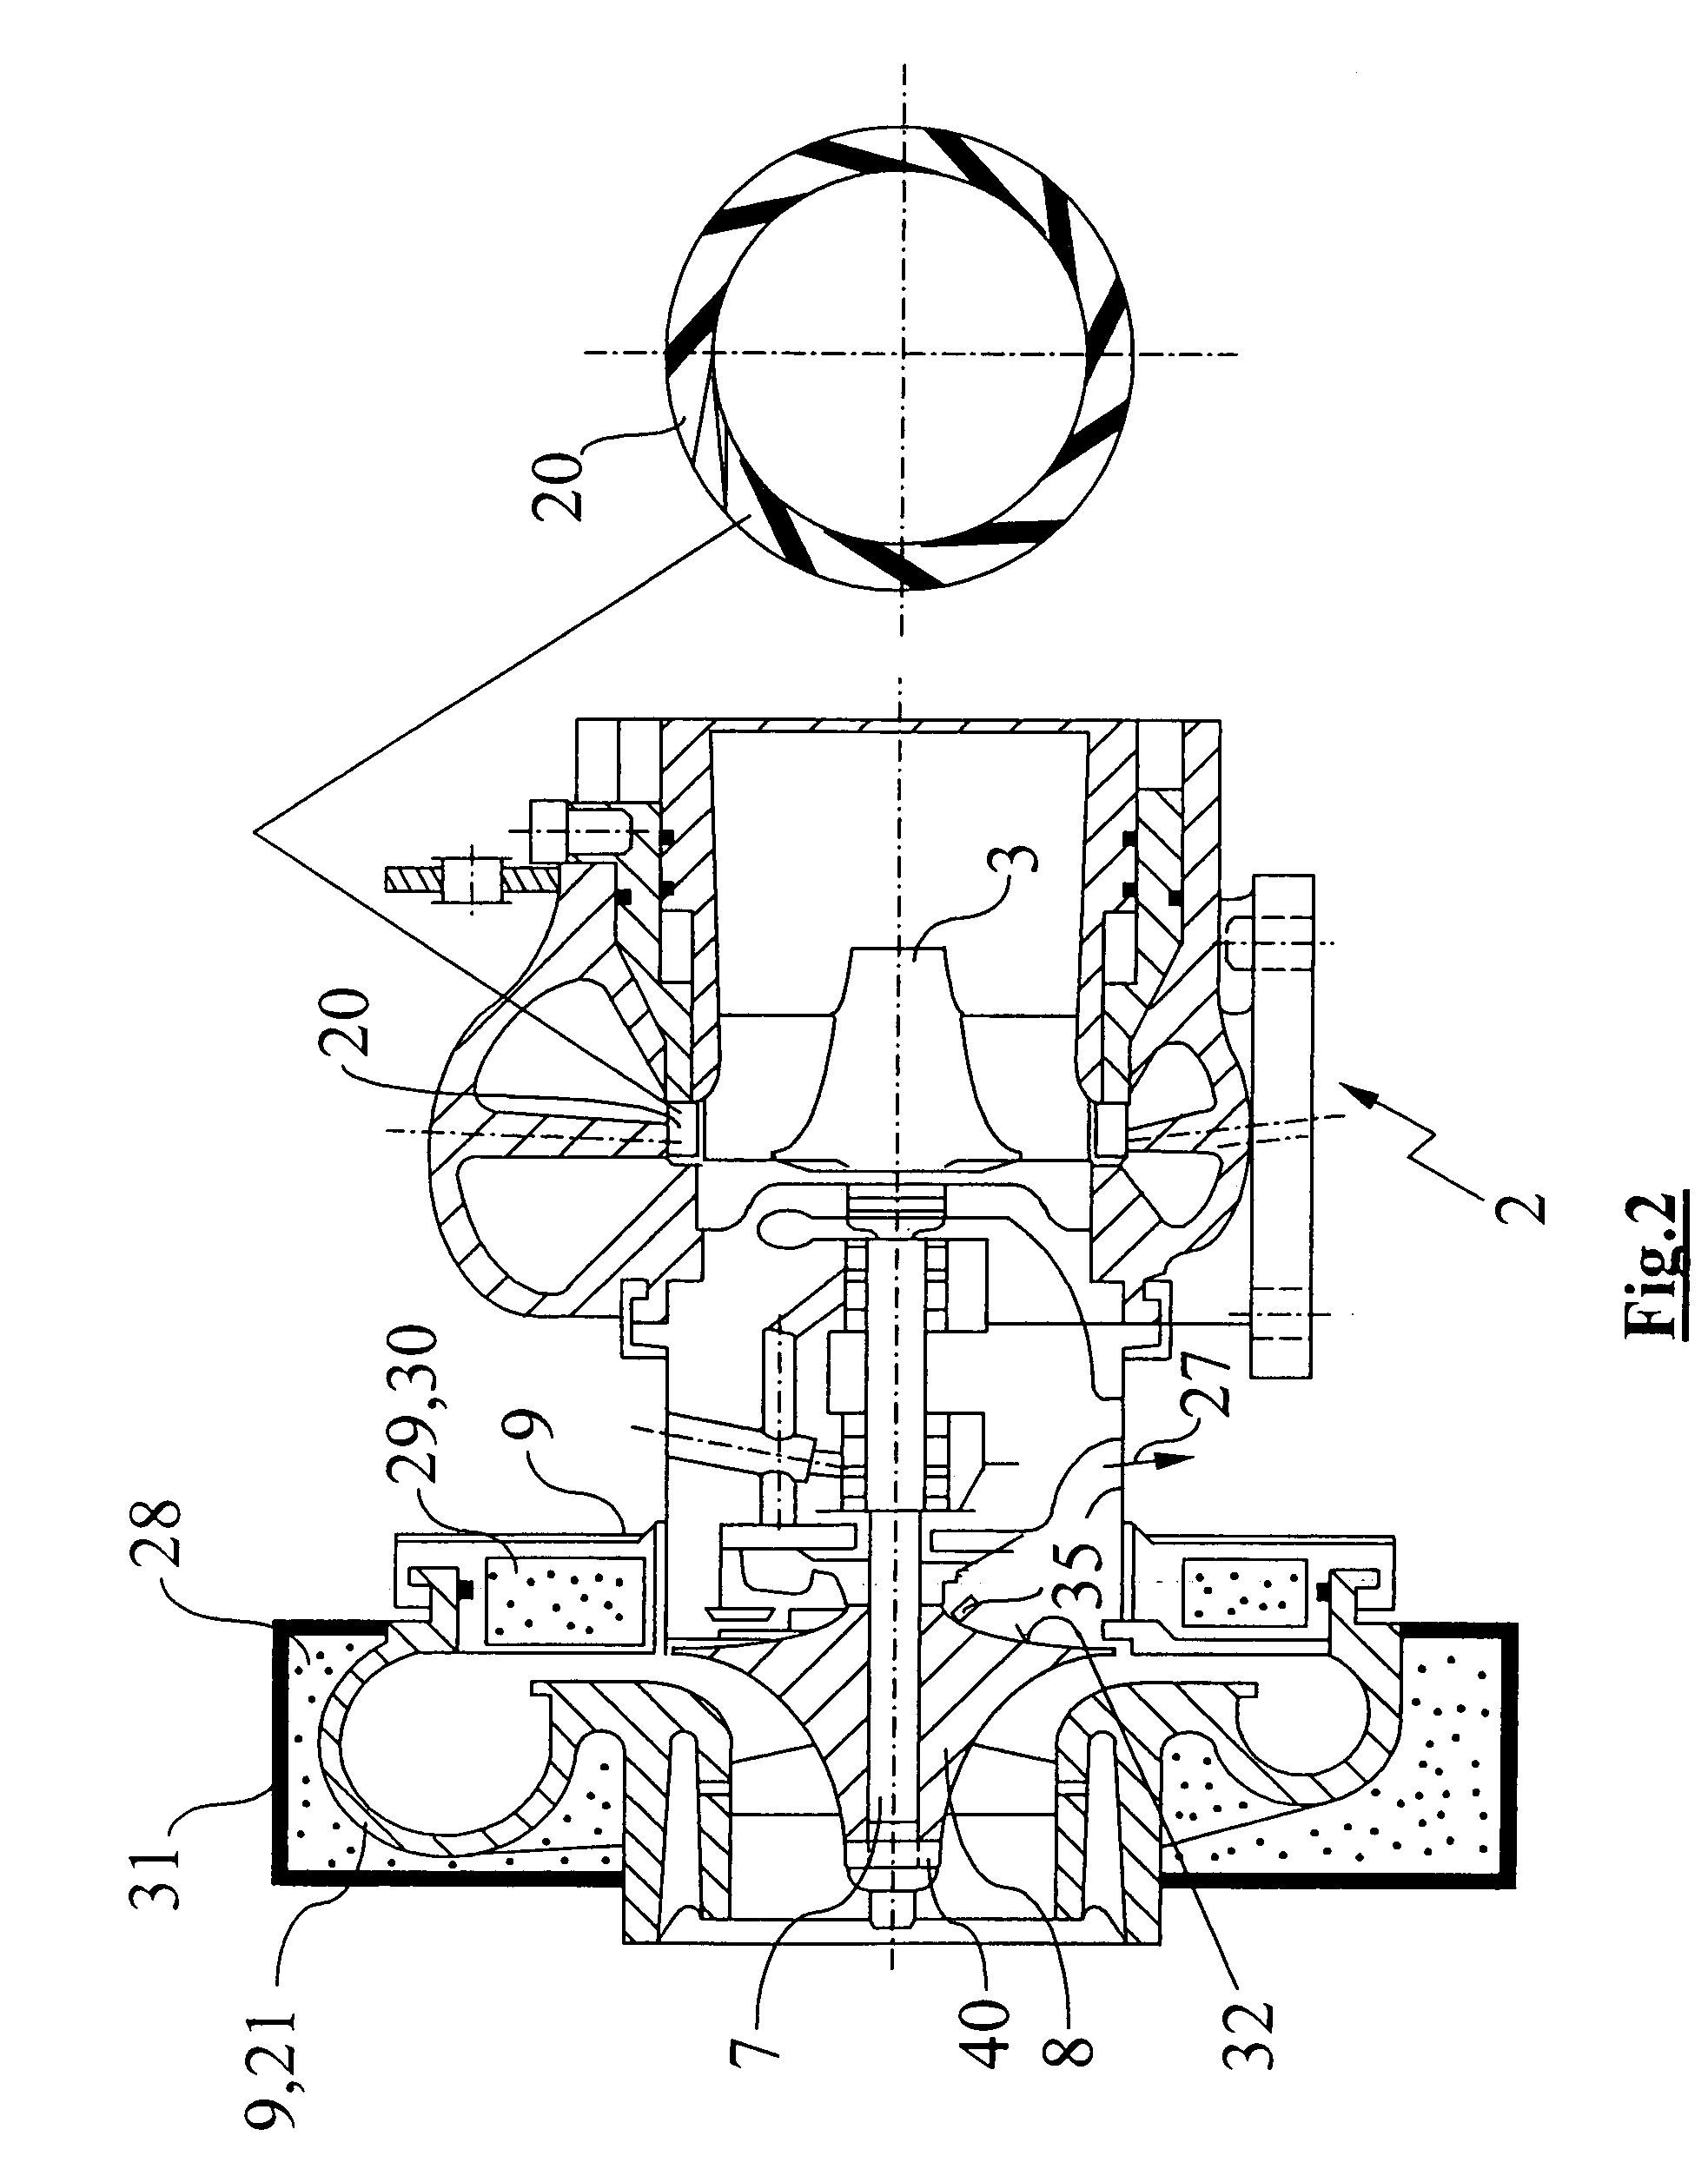 Exhaust-gas turbocharger